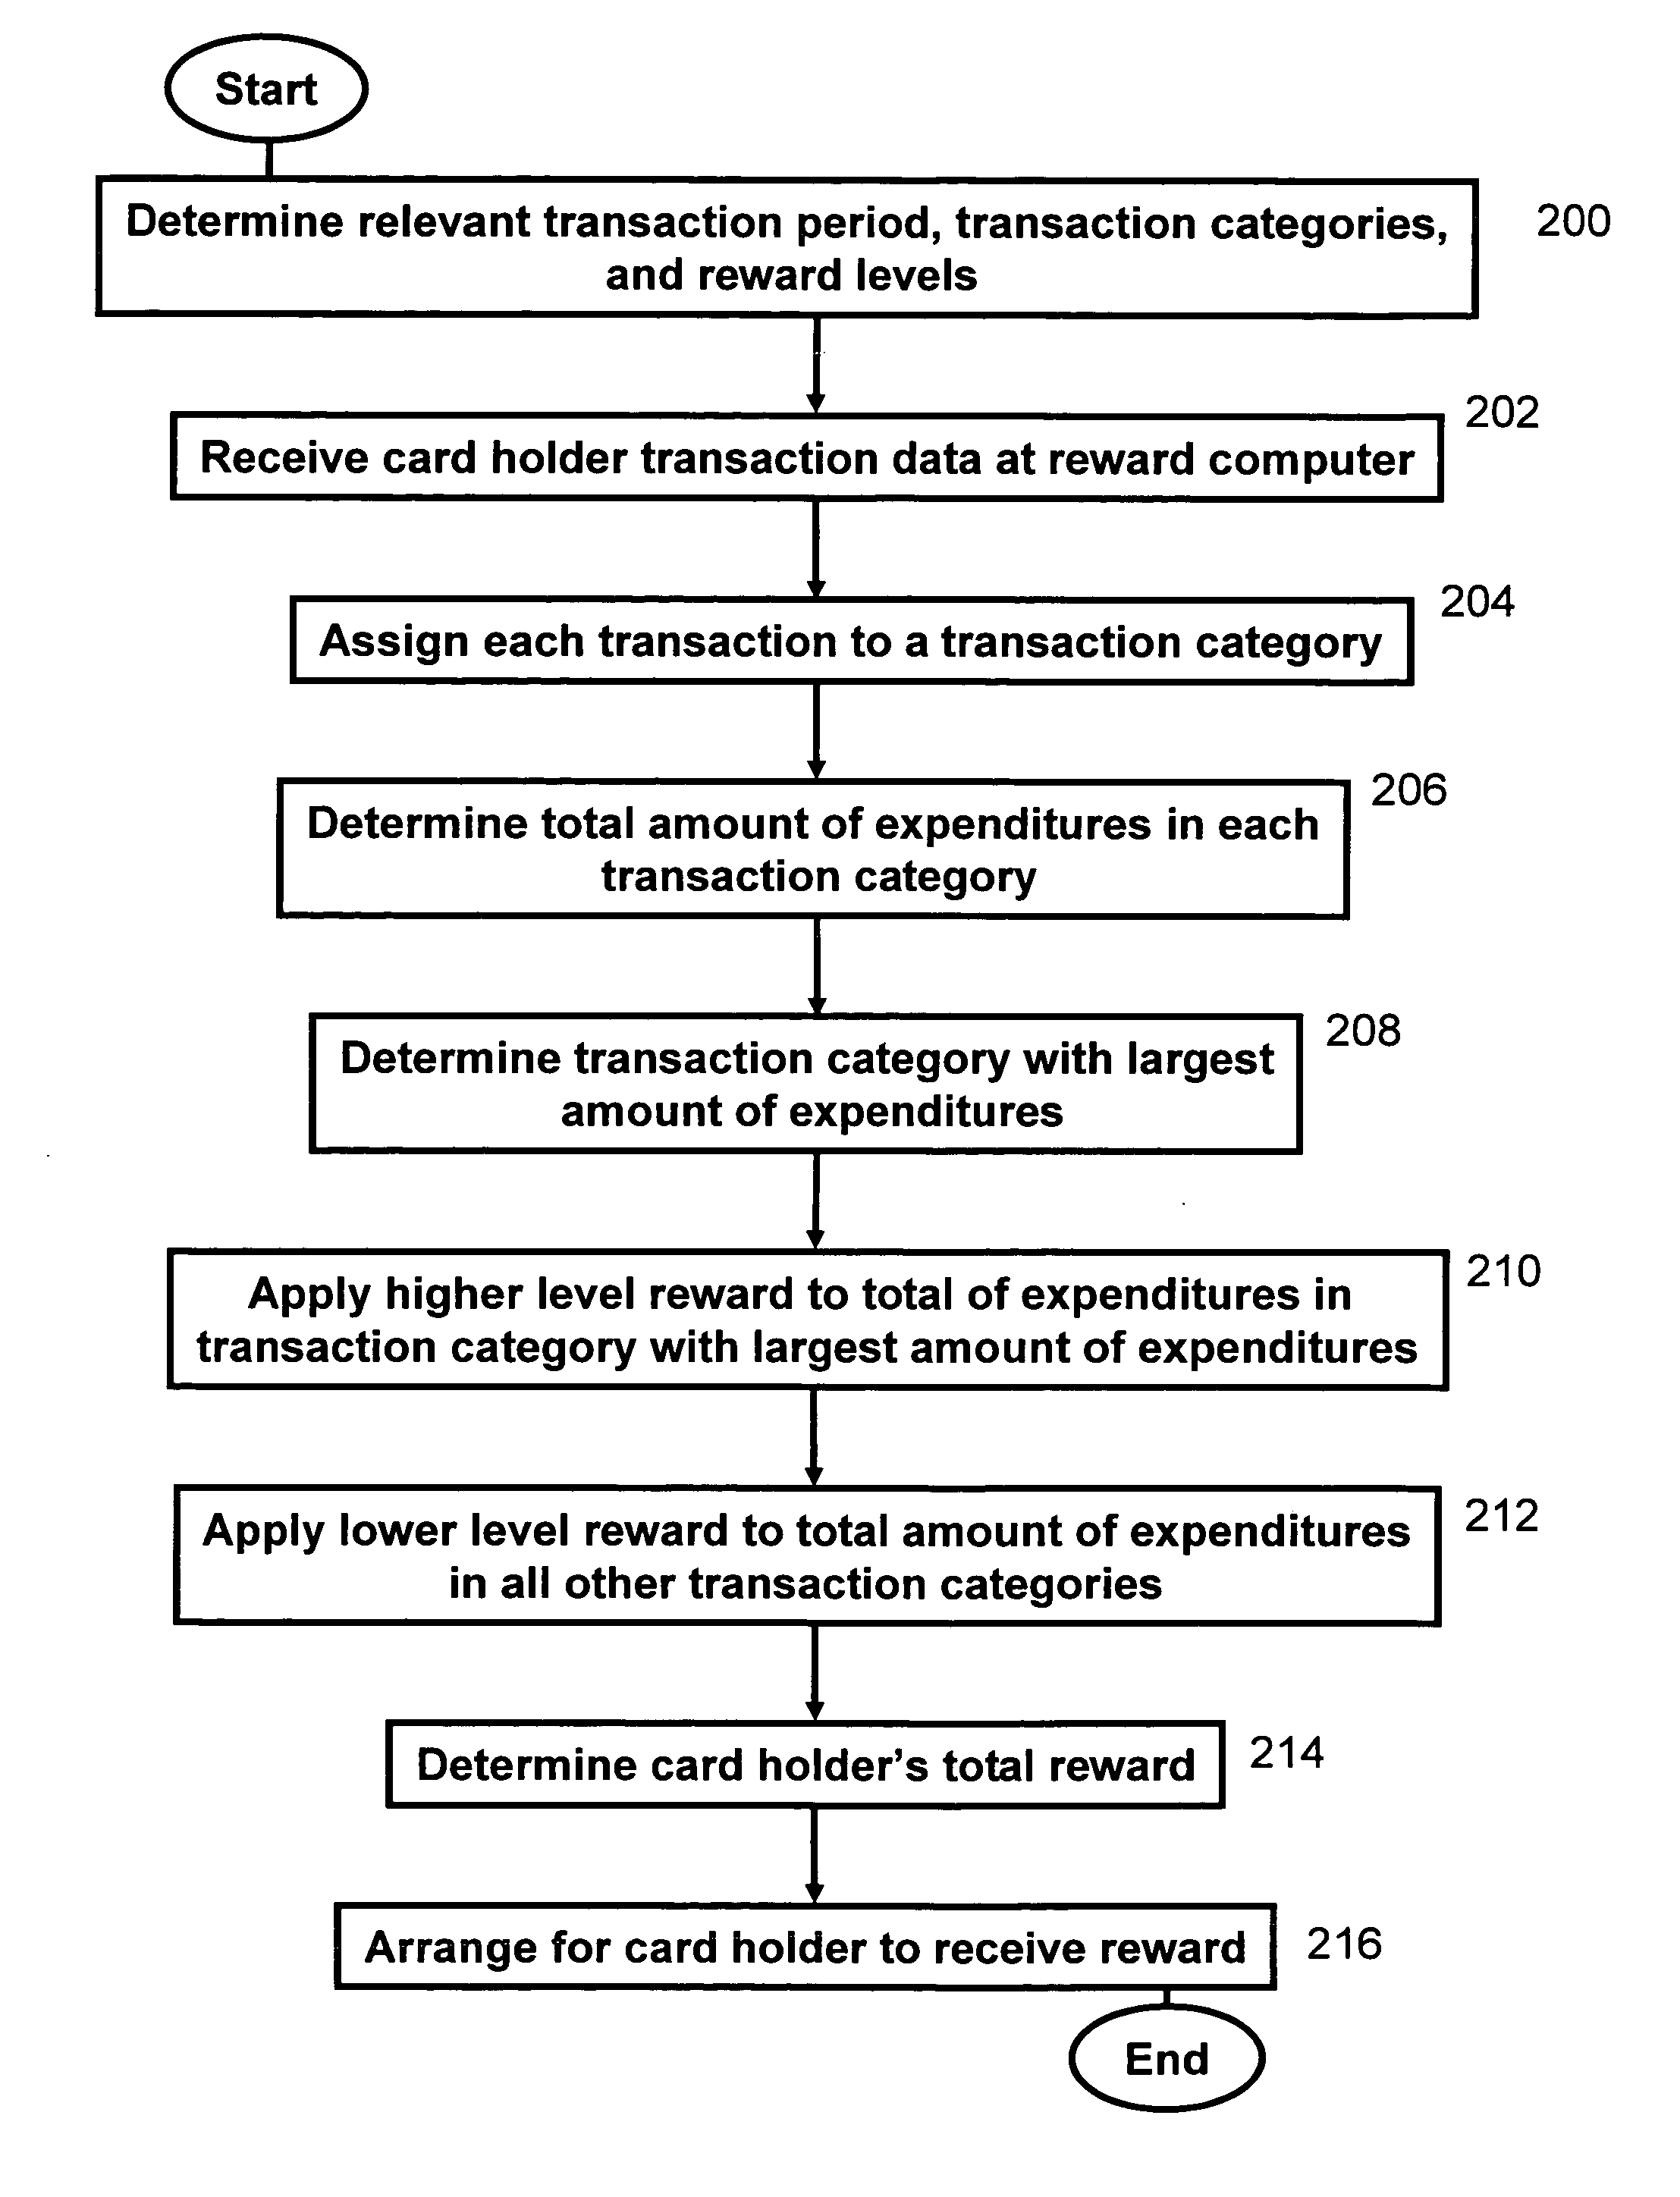 System and method for issuing rewards to card holders